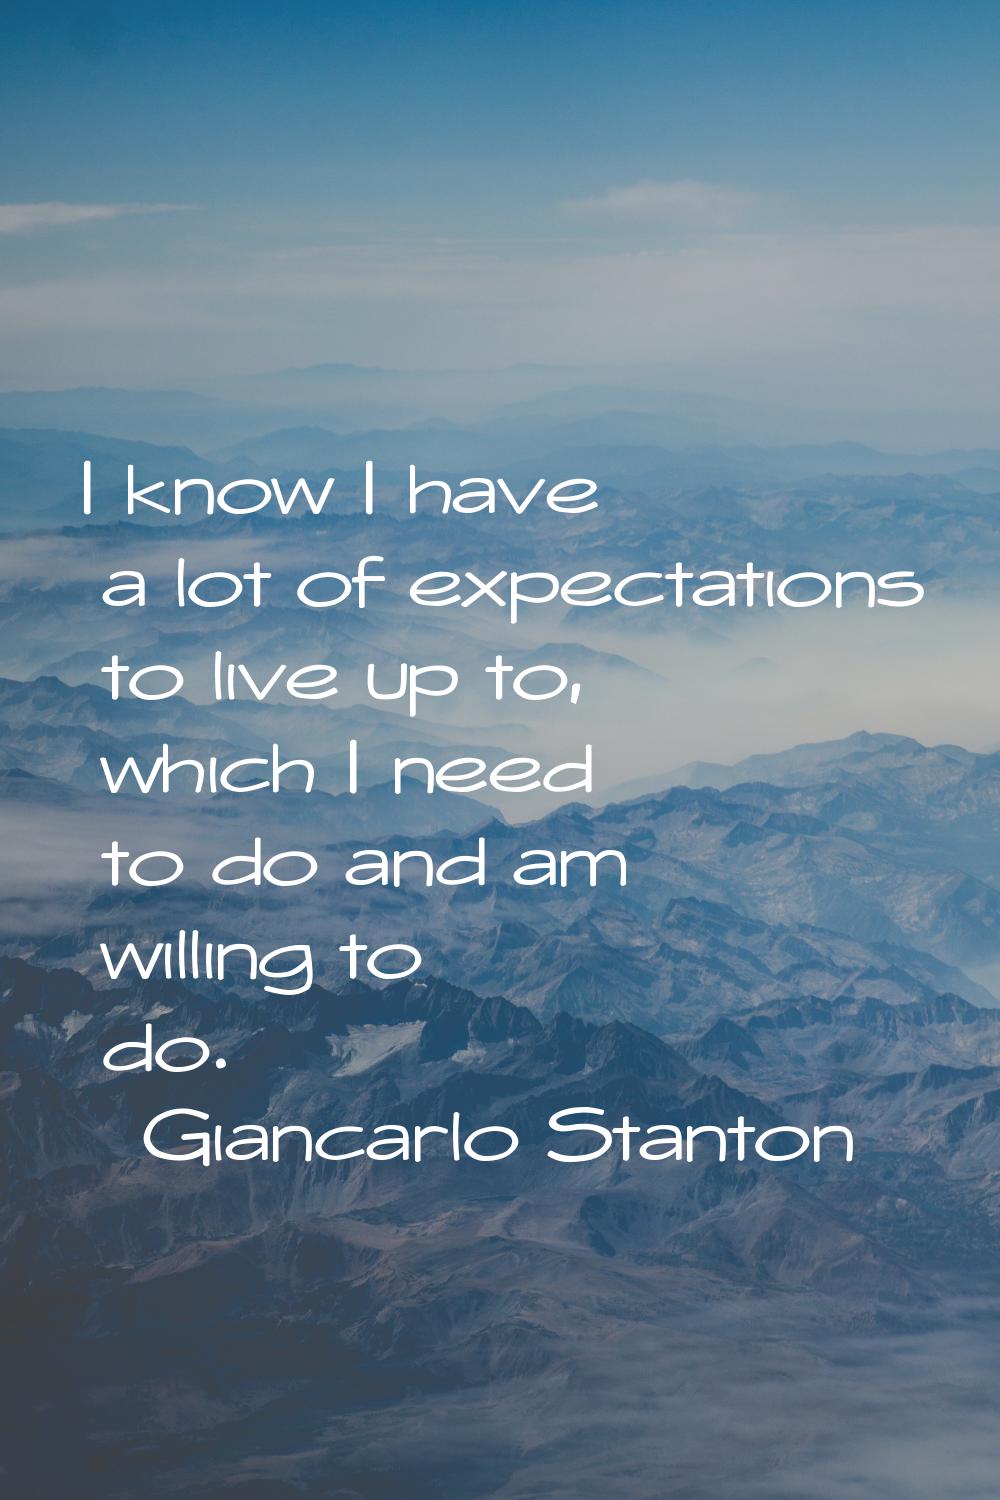 I know I have a lot of expectations to live up to, which I need to do and am willing to do.